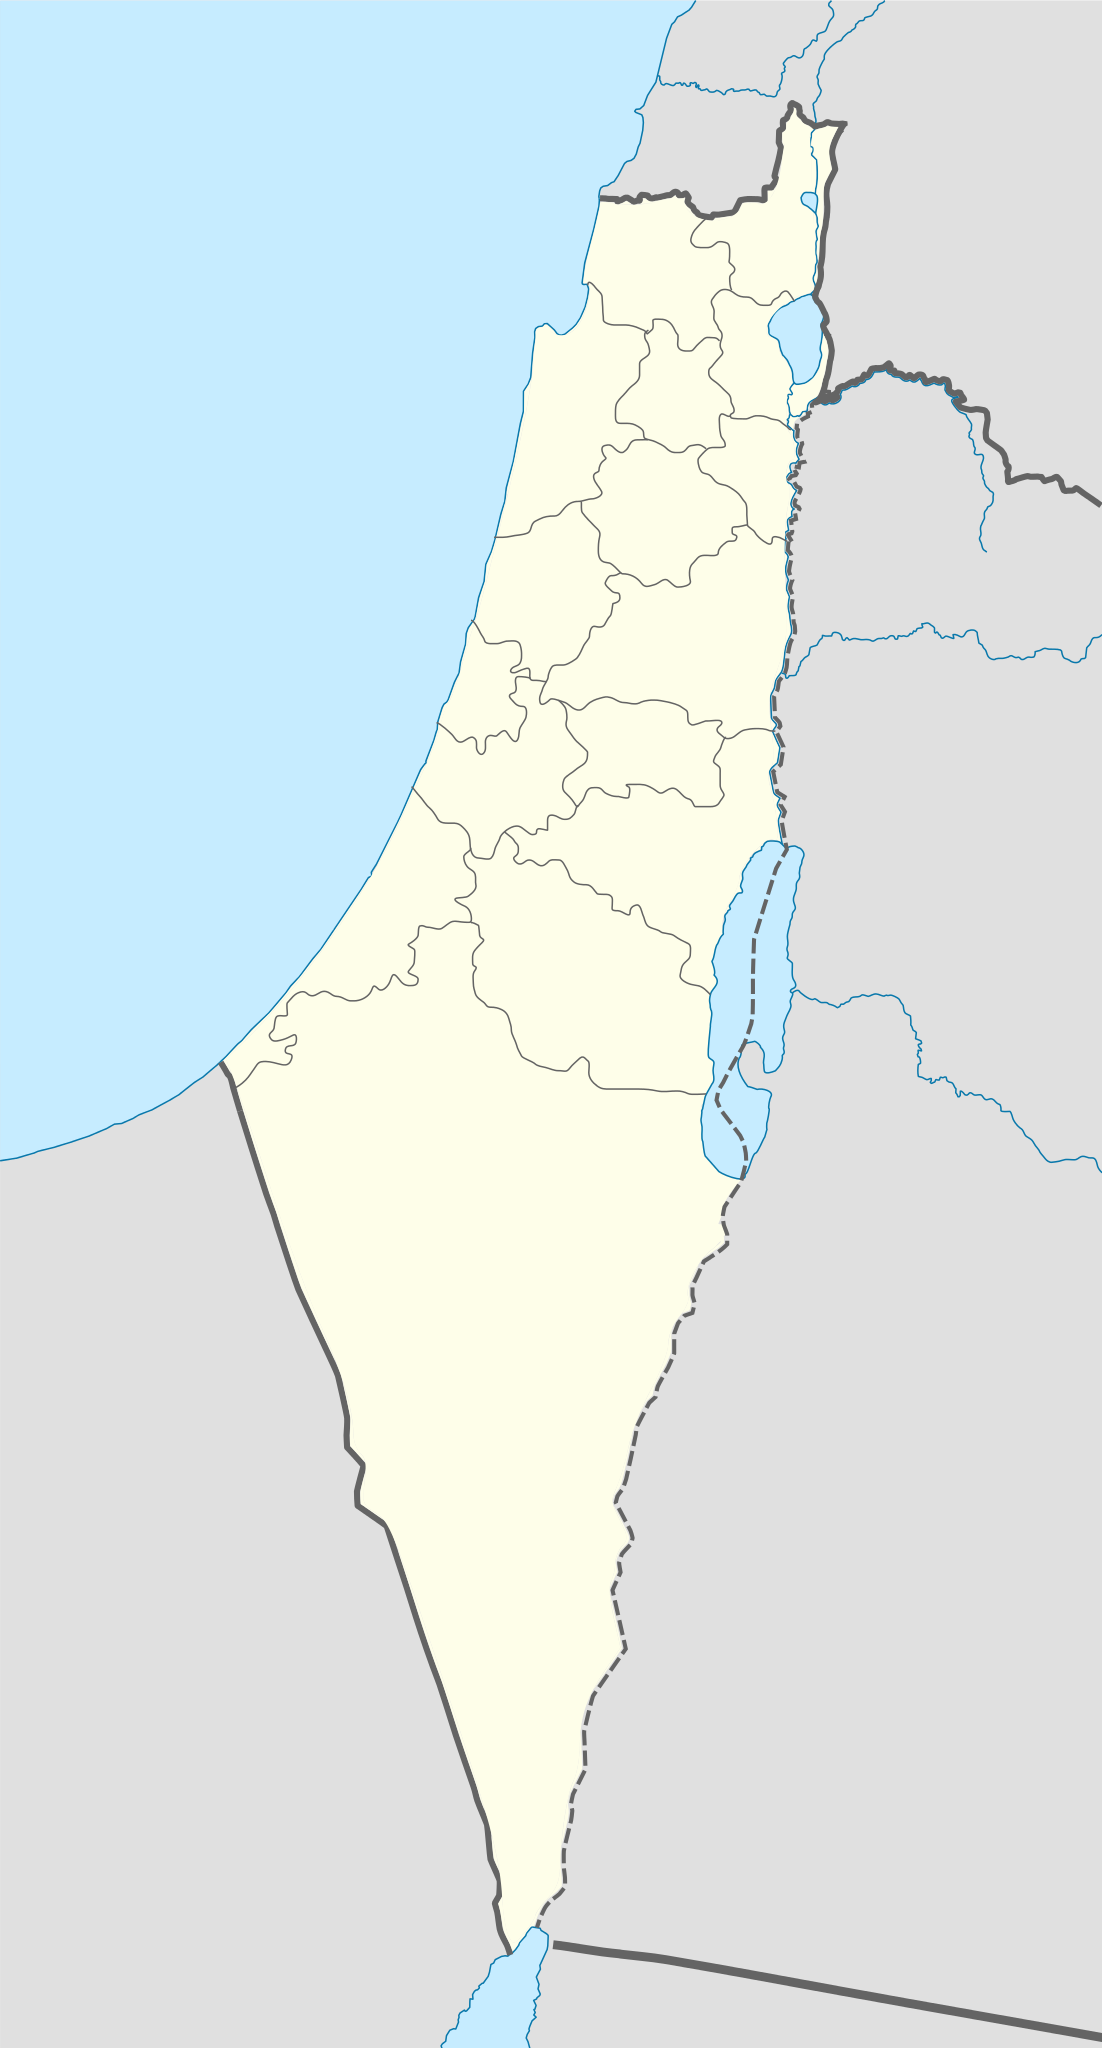 Map of Palestine, including areas occupied by Israel.